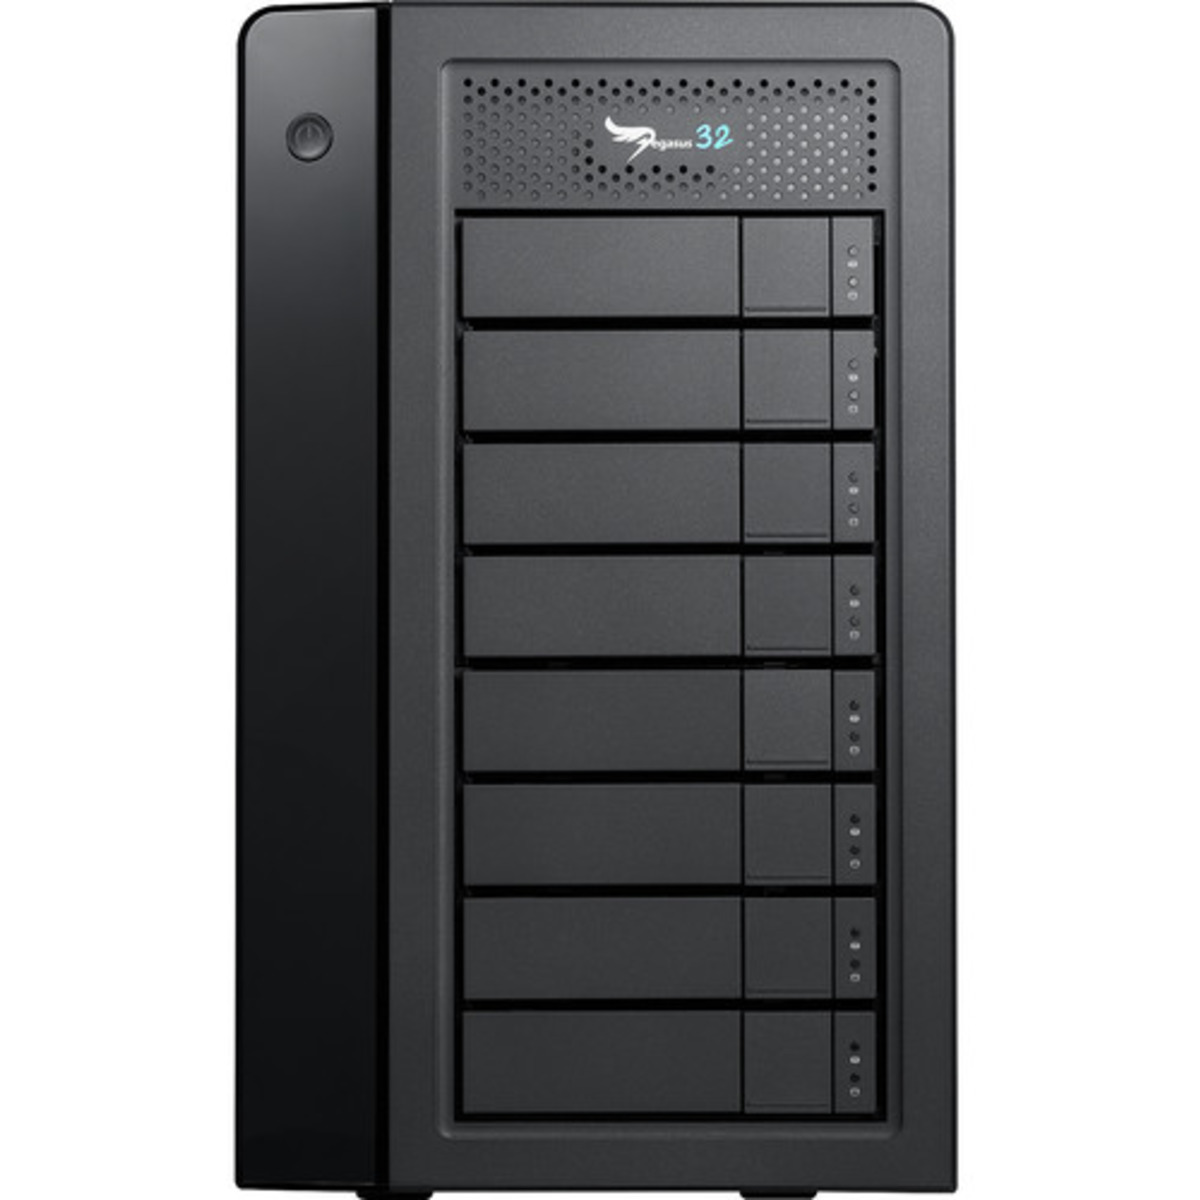 Promise Technology Pegasus32 R8 Thunderbolt 3 144tb 8-Bay Desktop Multimedia / Power User / Business DAS - Direct Attached Storage Device 6x24tb Western Digital Ultrastar HC580 SED WUH722424ALE6L1 3.5 7200rpm SATA 6Gb/s HDD ENTERPRISE Class Drives Installed - Burn-In Tested - ON SALE Pegasus32 R8 Thunderbolt 3